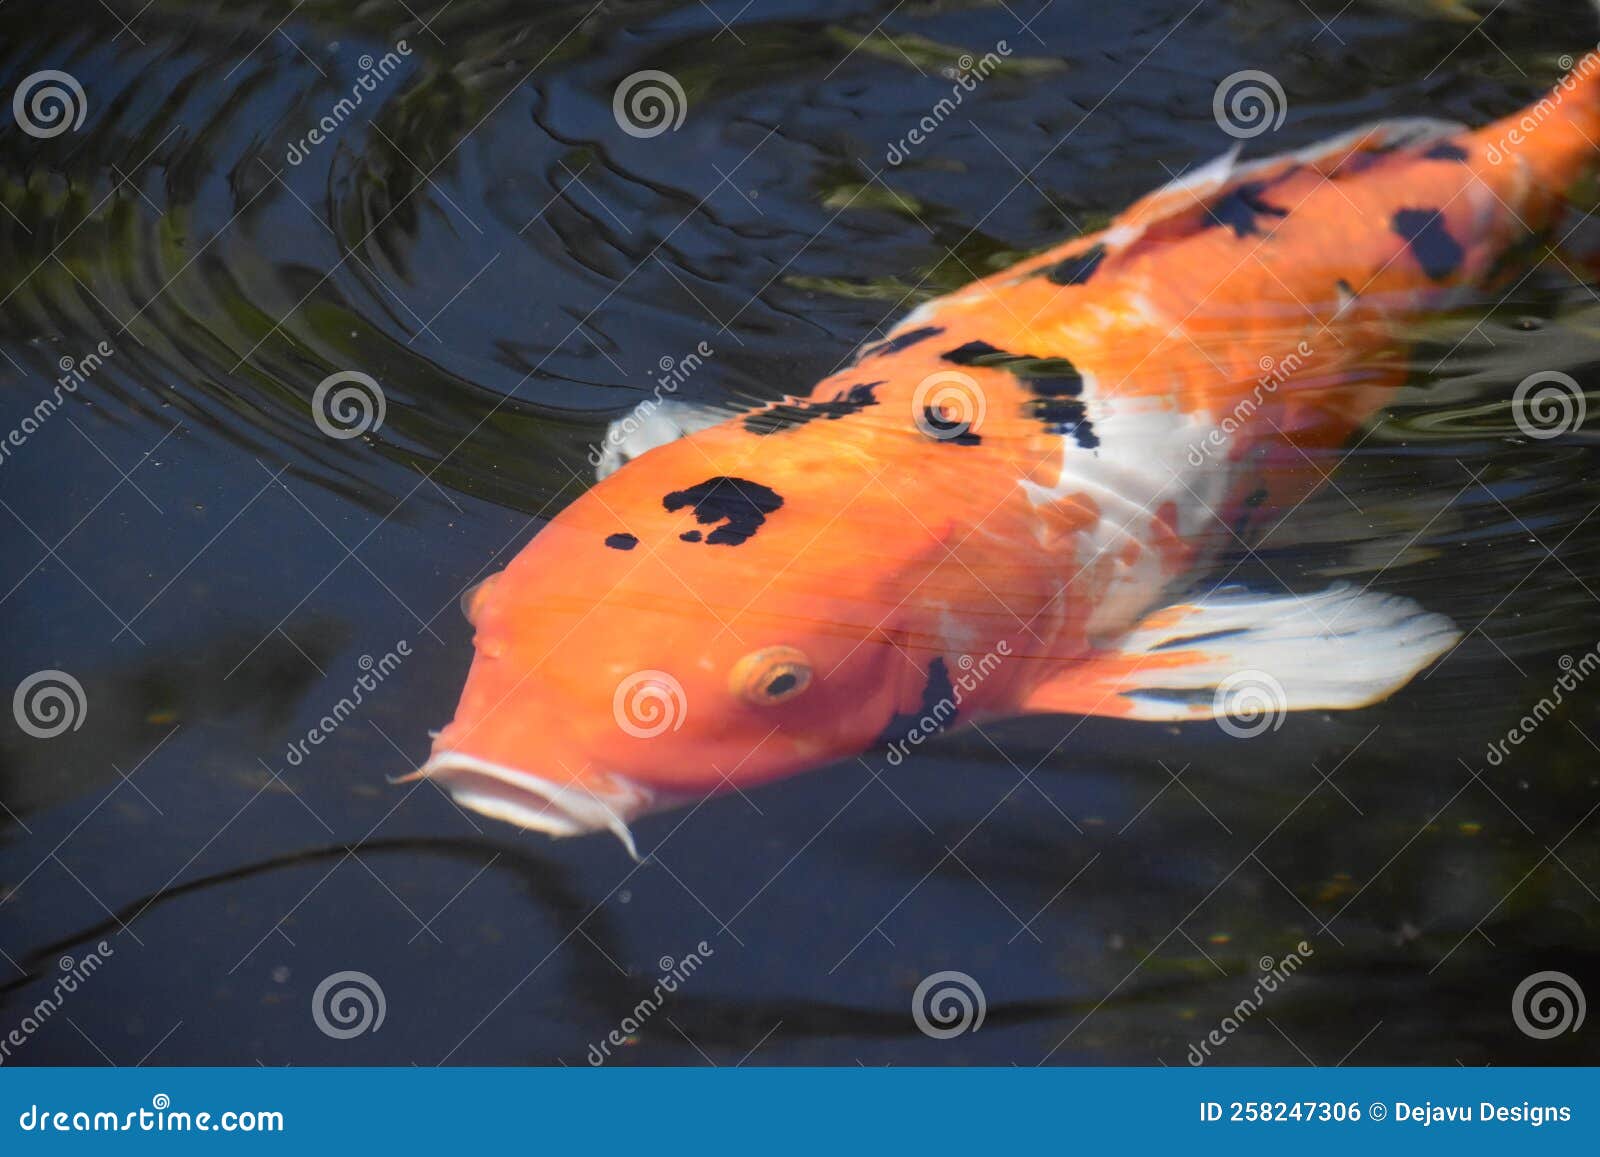 Looking into the Face of a Swimming Koi Fish Stock Photo - Image